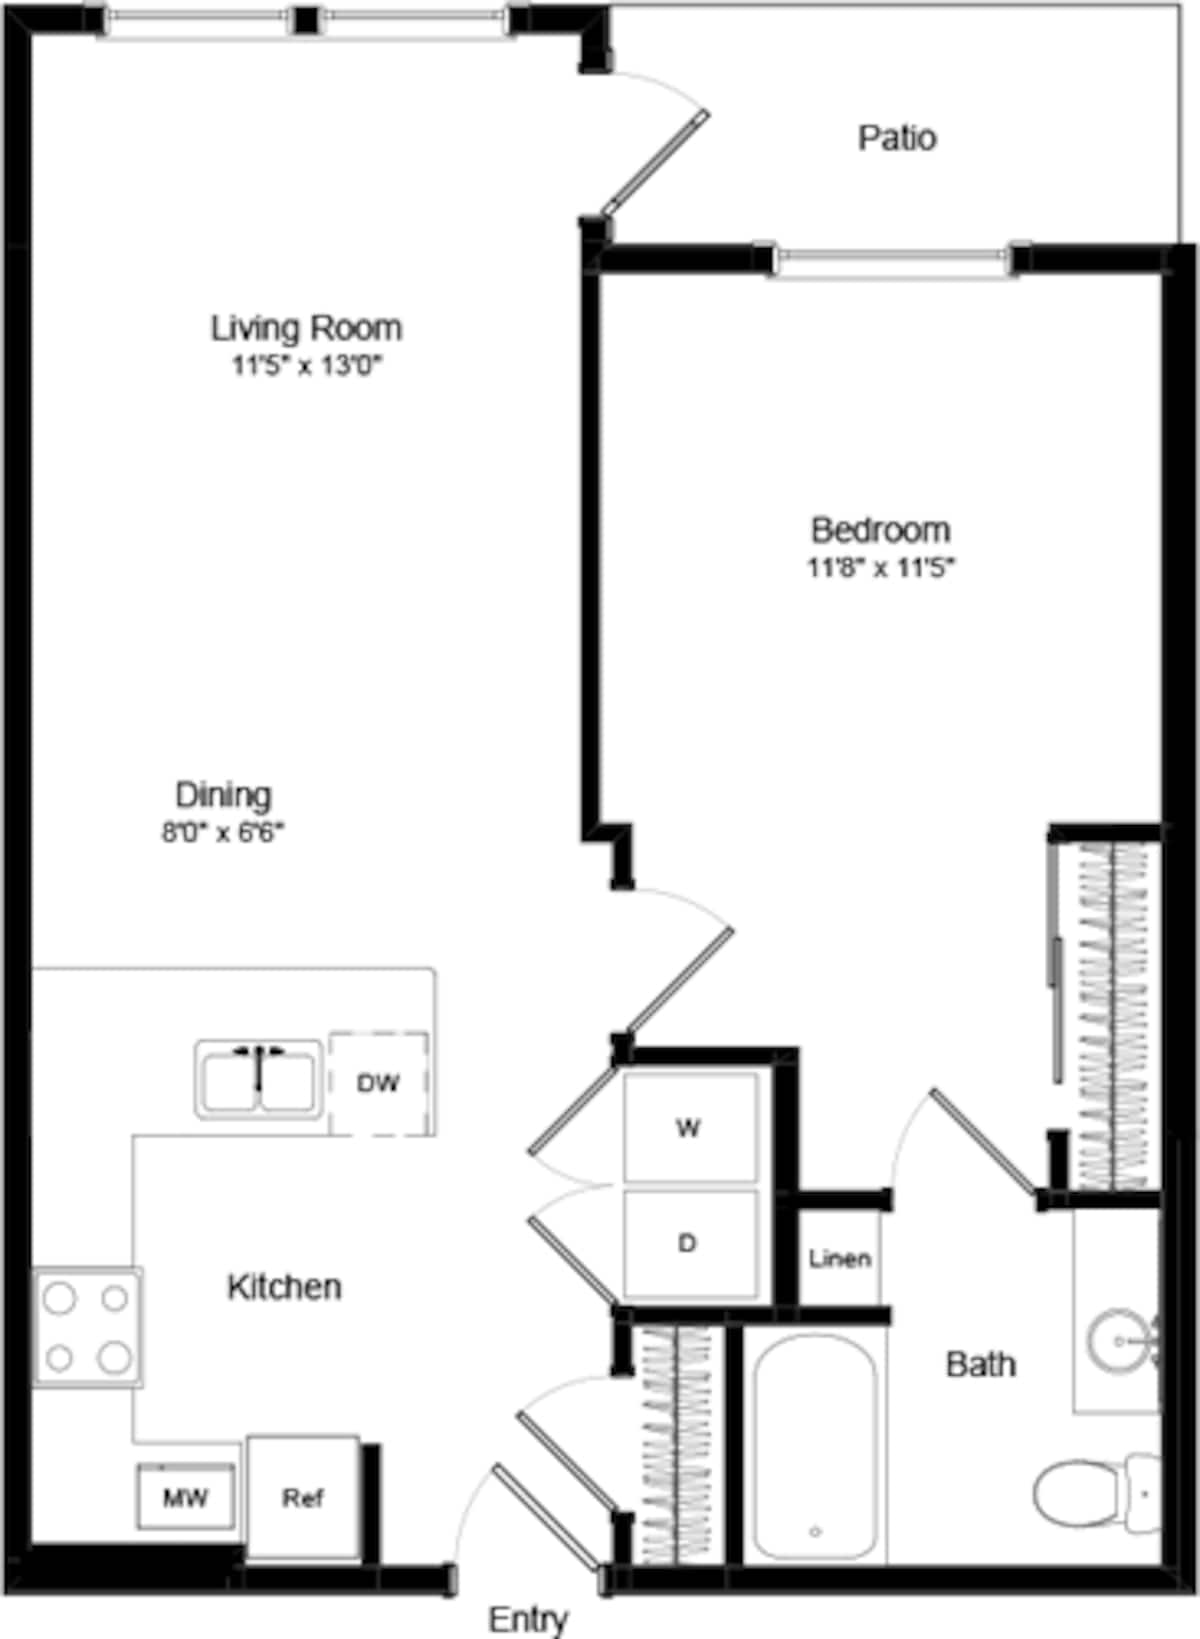 Floorplan diagram for One Bed A-1 - Phase III, showing 1 bedroom